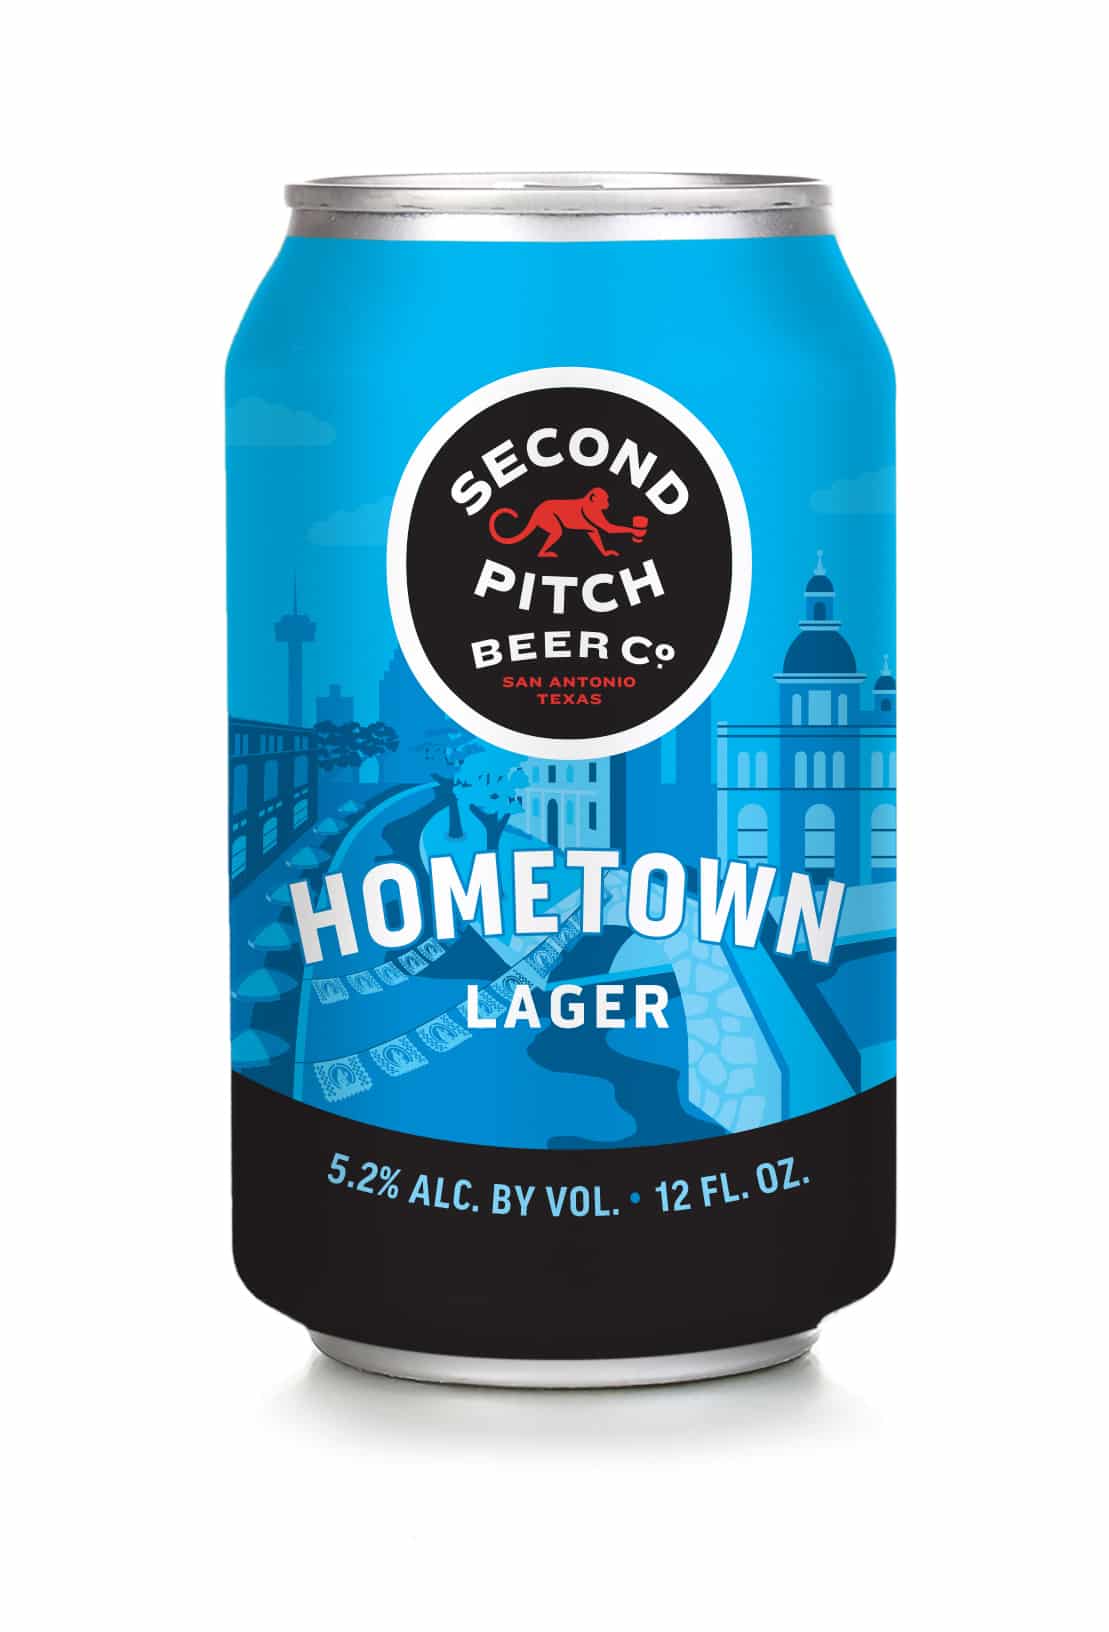 Second Pitch Beer Company